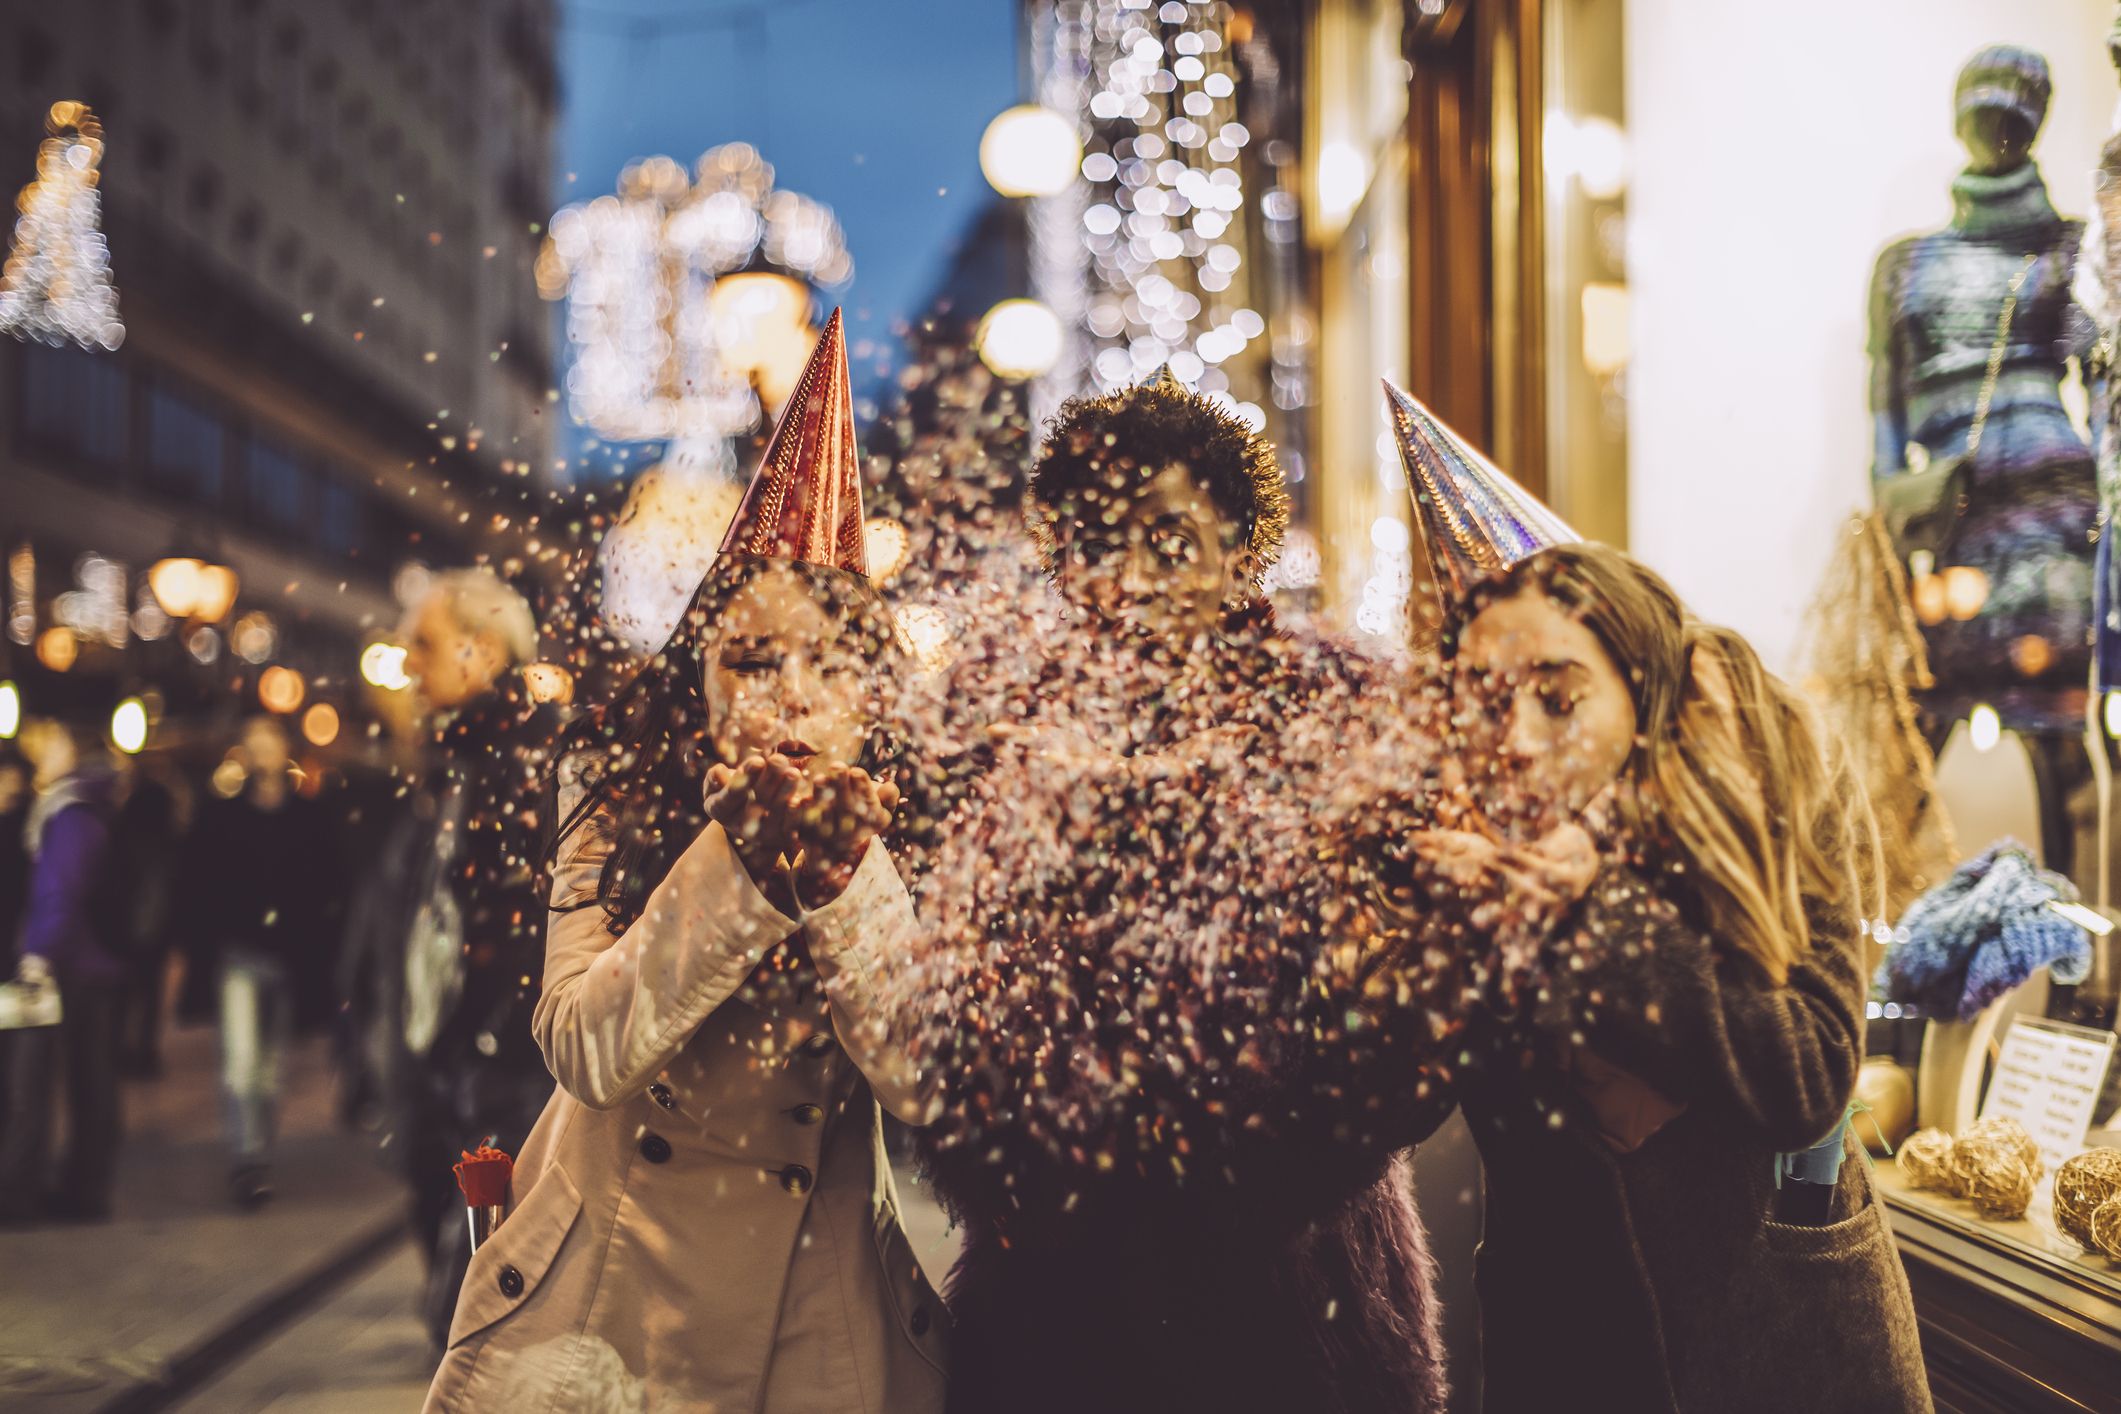 New Year: Celebrate The Joy Of Giving: New Year Gifts For Friends